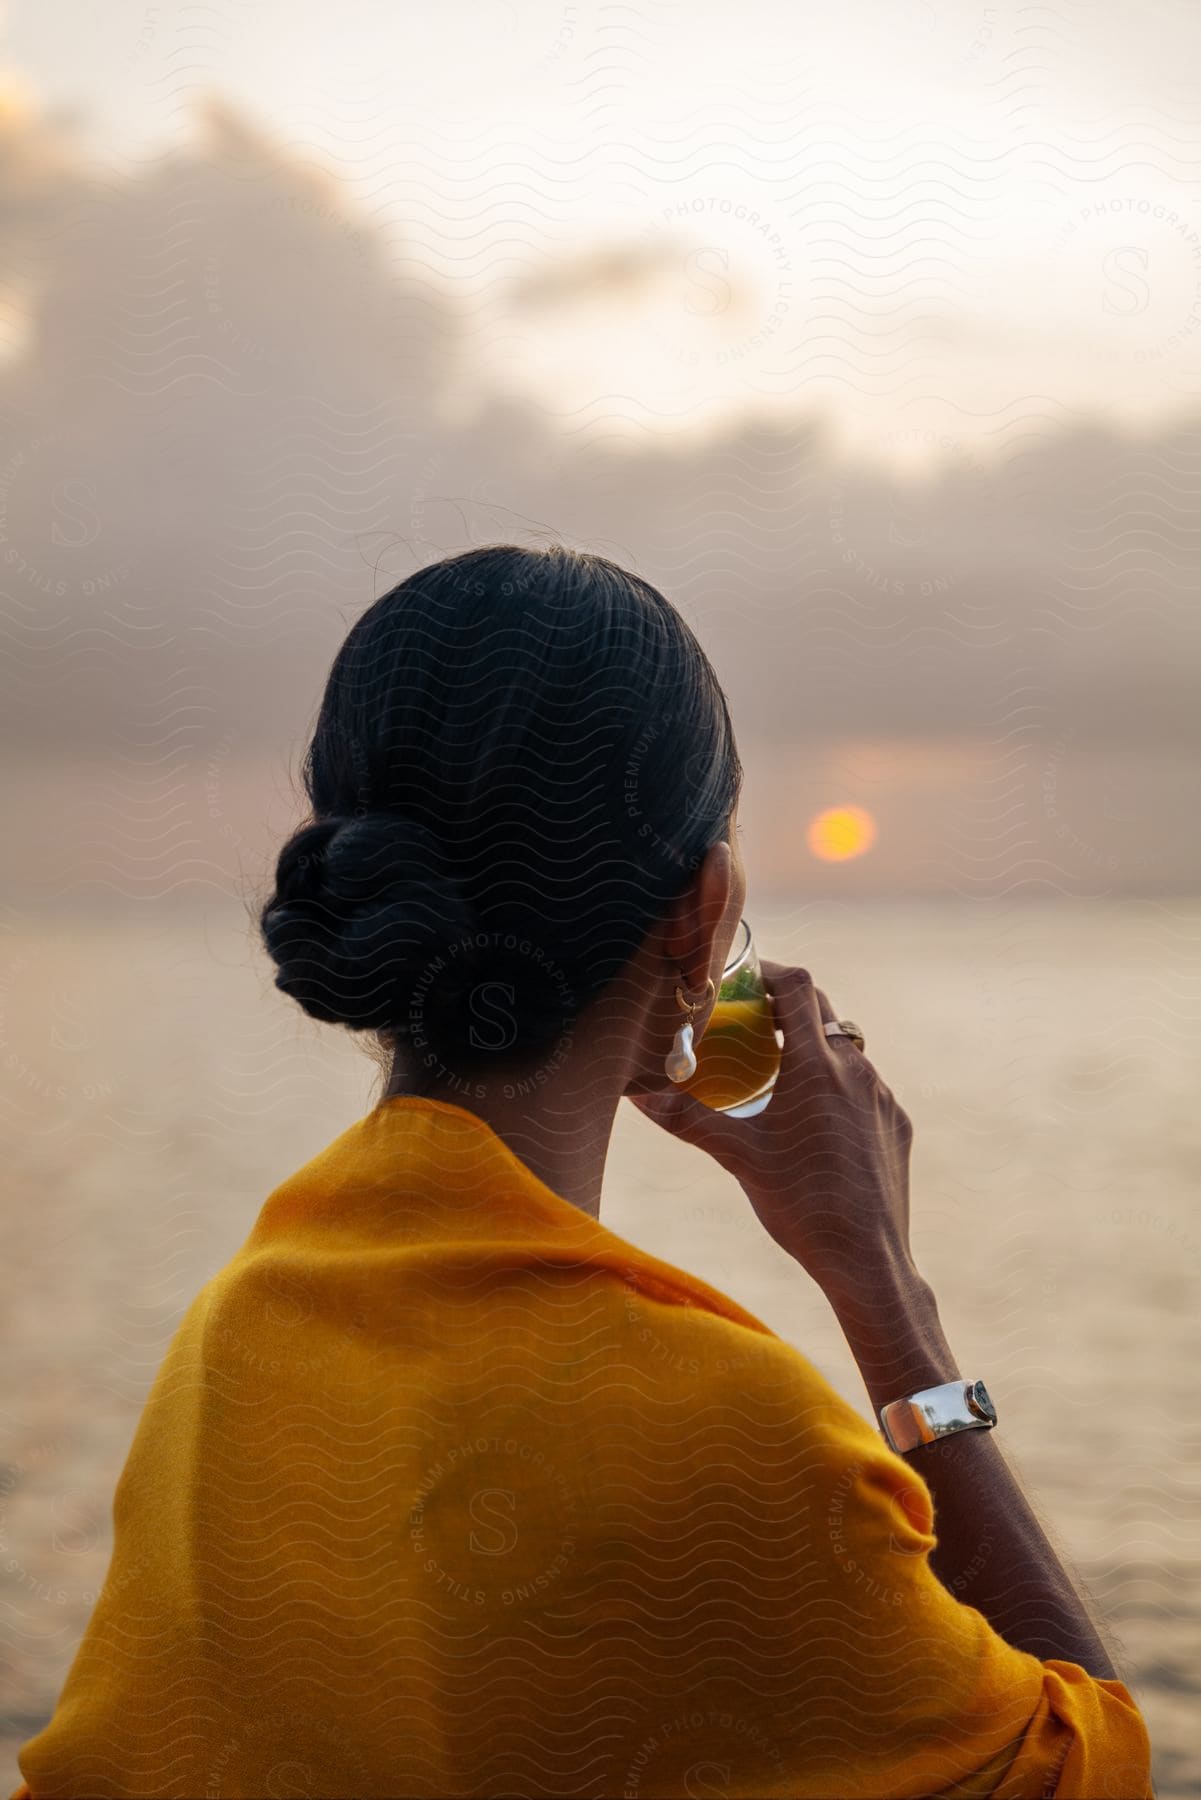 A woman in yellow clothing is drinking something while looking at the sea horizon with the sun above.